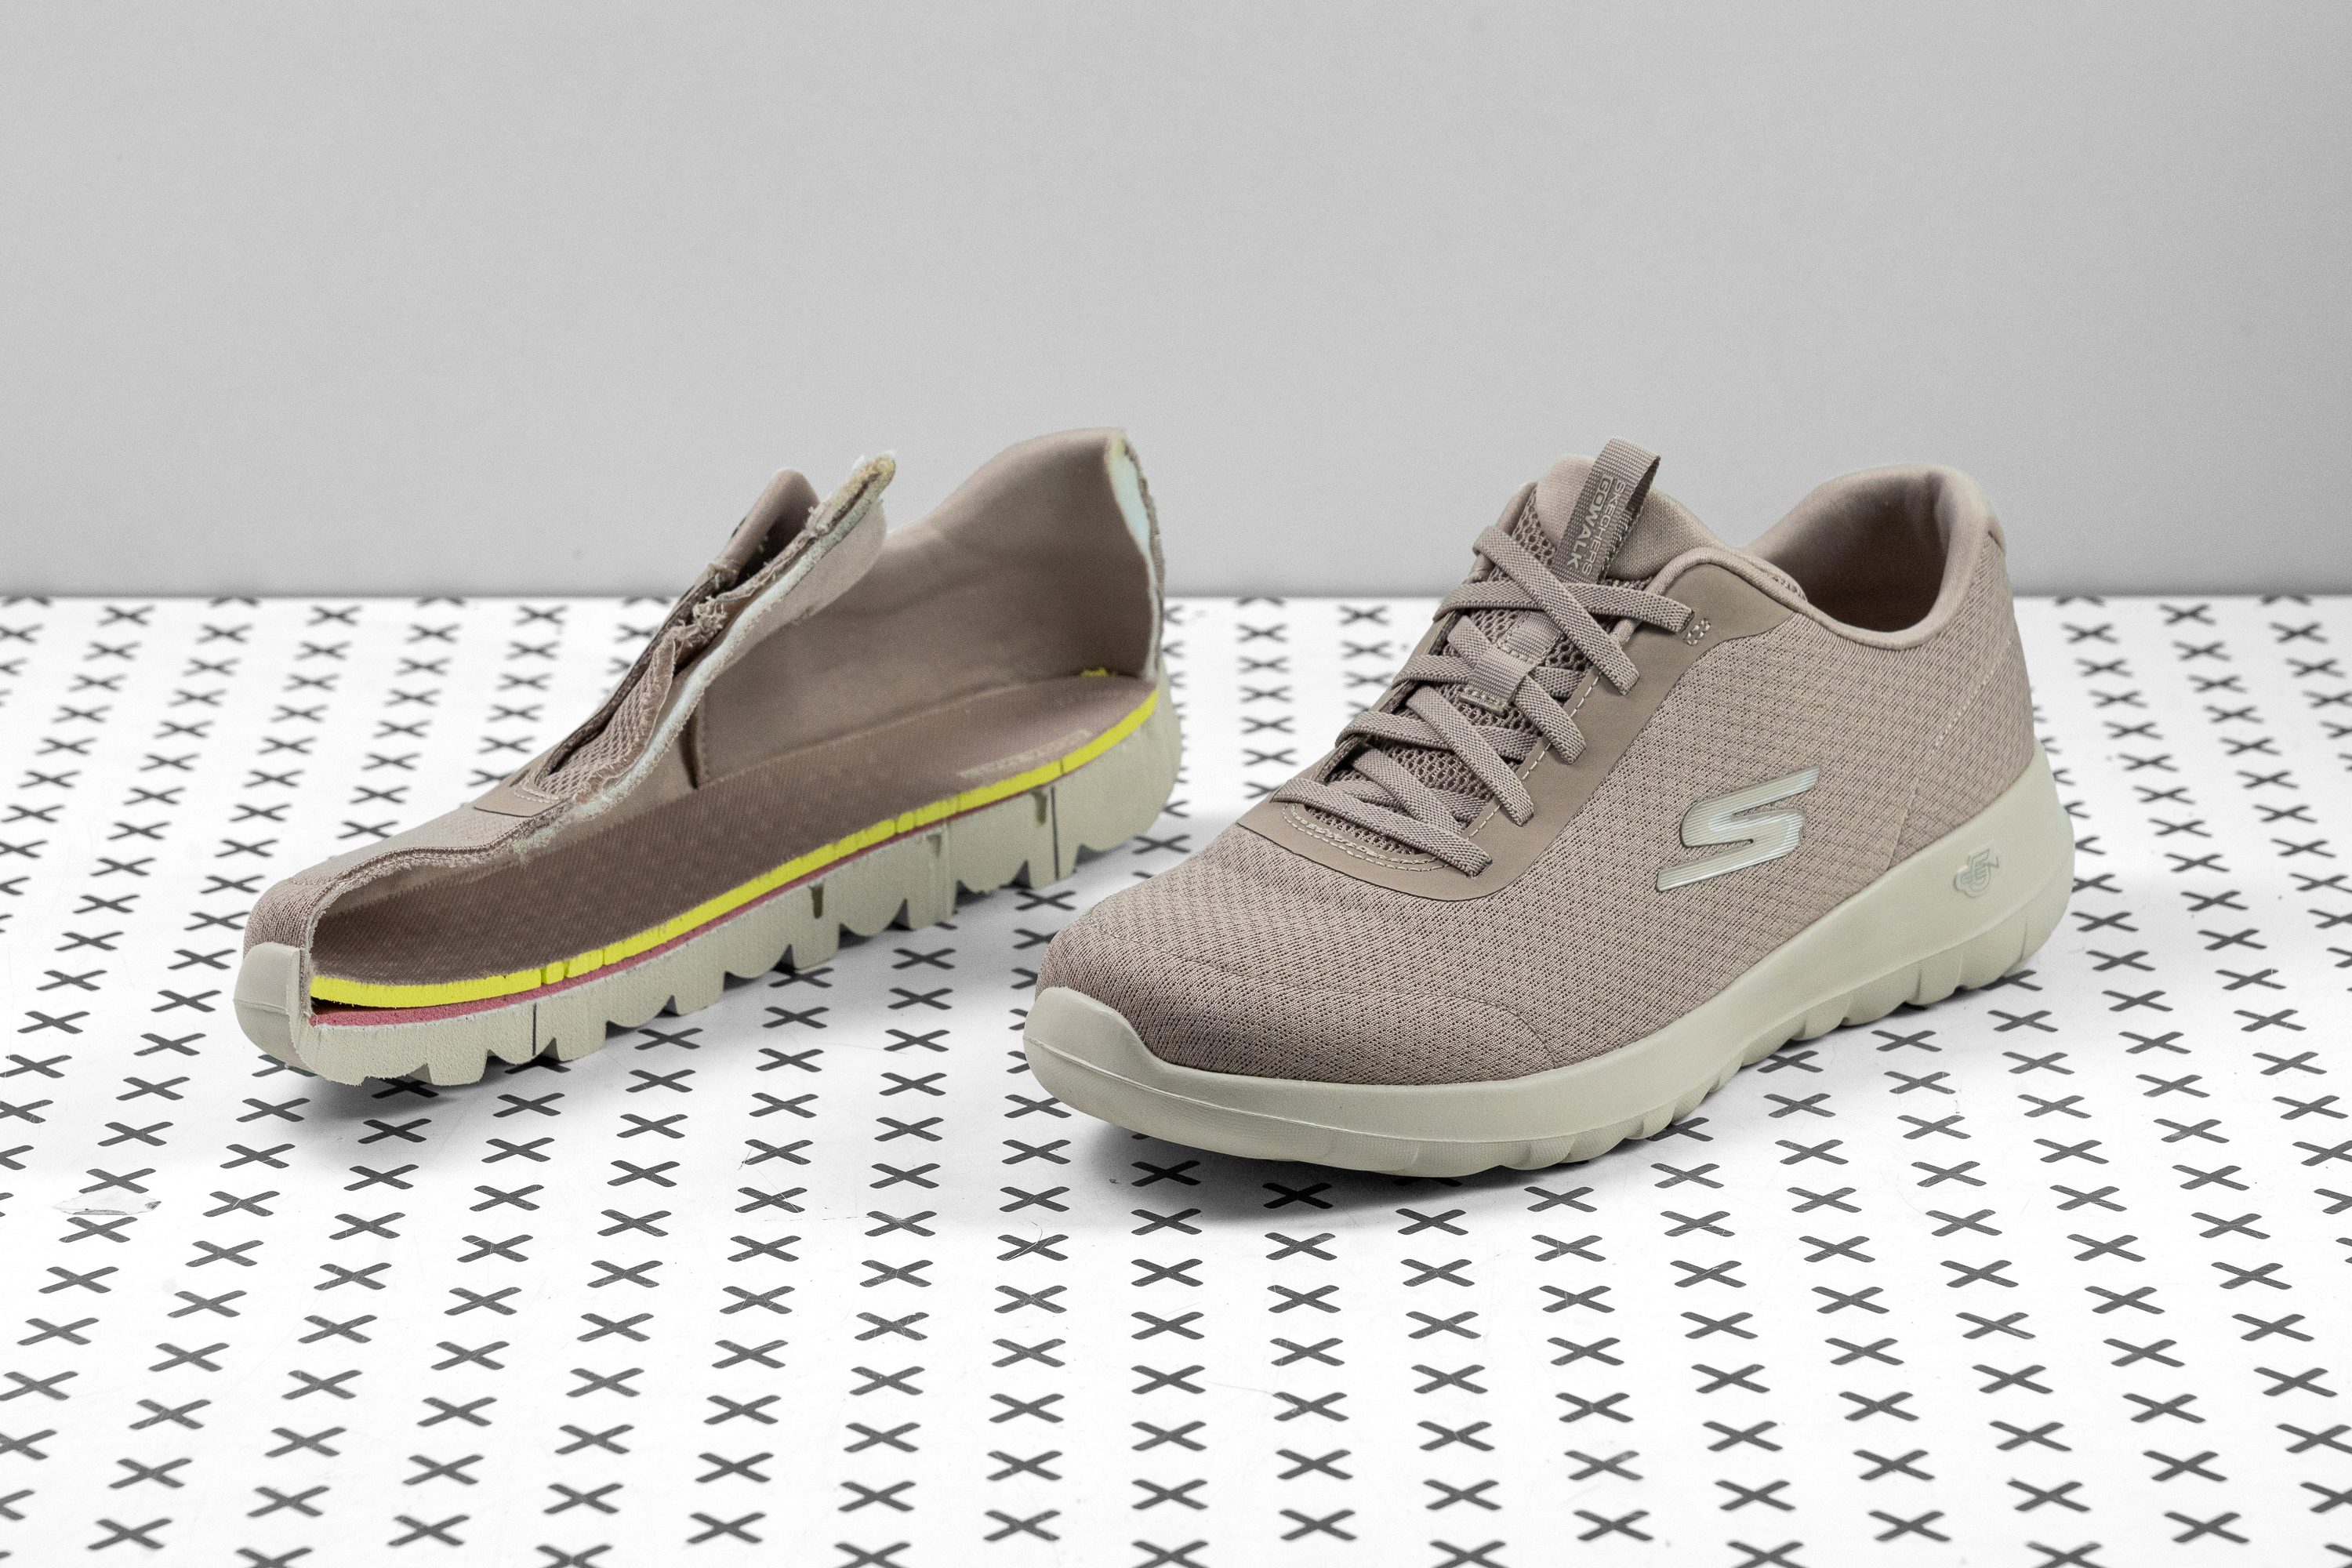 Comfort and Style of Skechers Go Walk Shoes